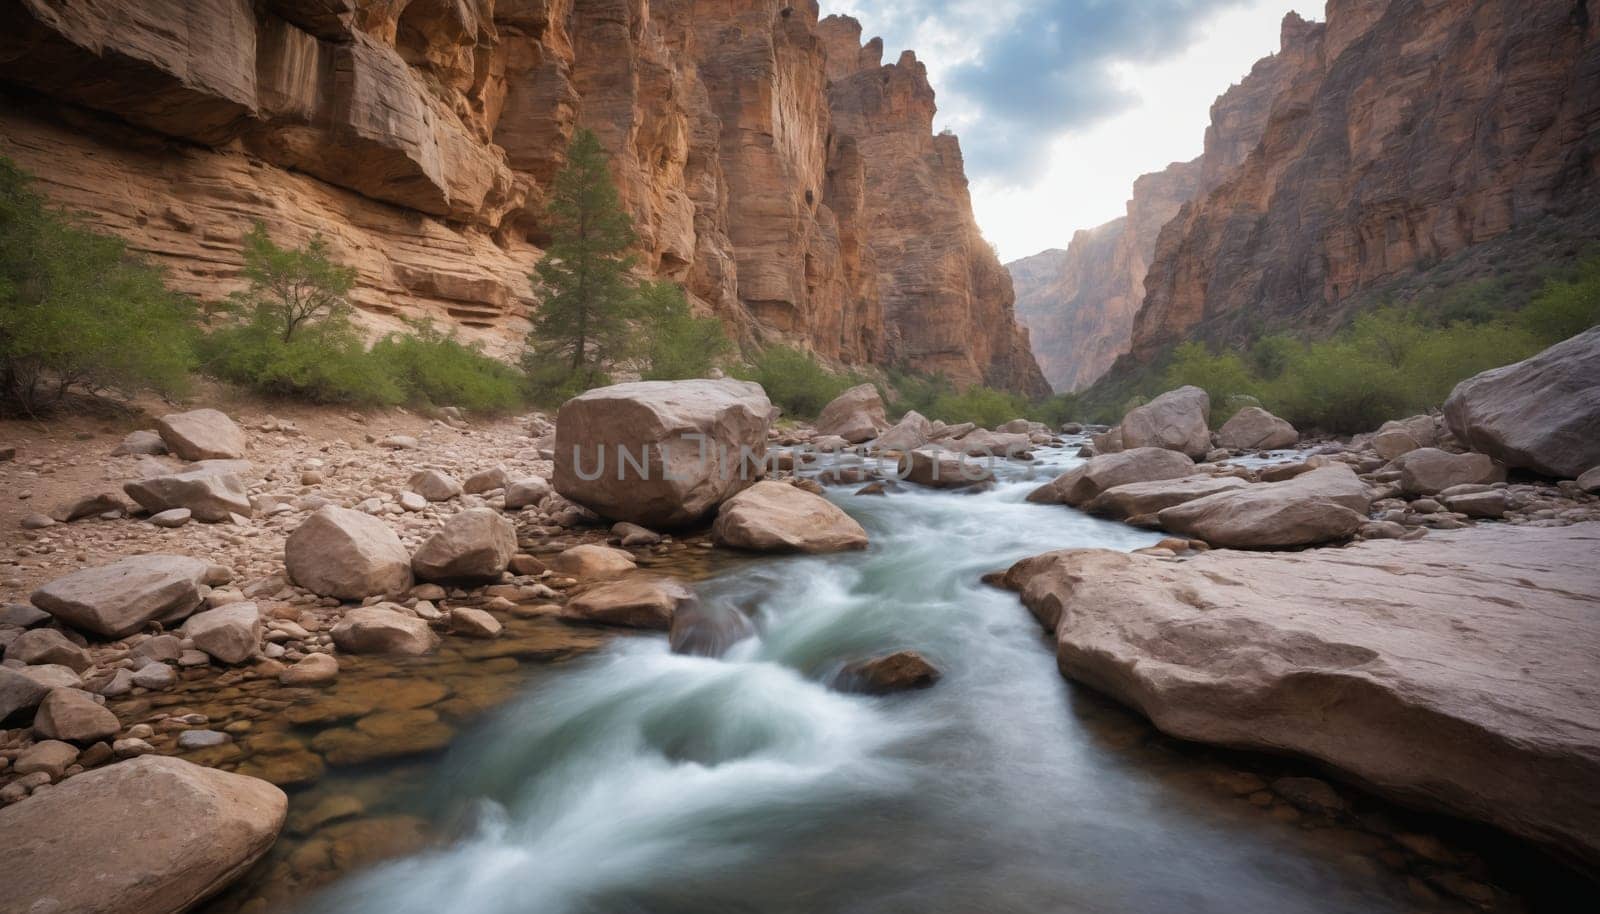 A stream flows through a narrow canyon, with towering cliffs on either side. The water is moving quickly, creating a sense of motion and energy, while the surrounding rocks are still and serene. The setting sun casts a golden glow on the scene.